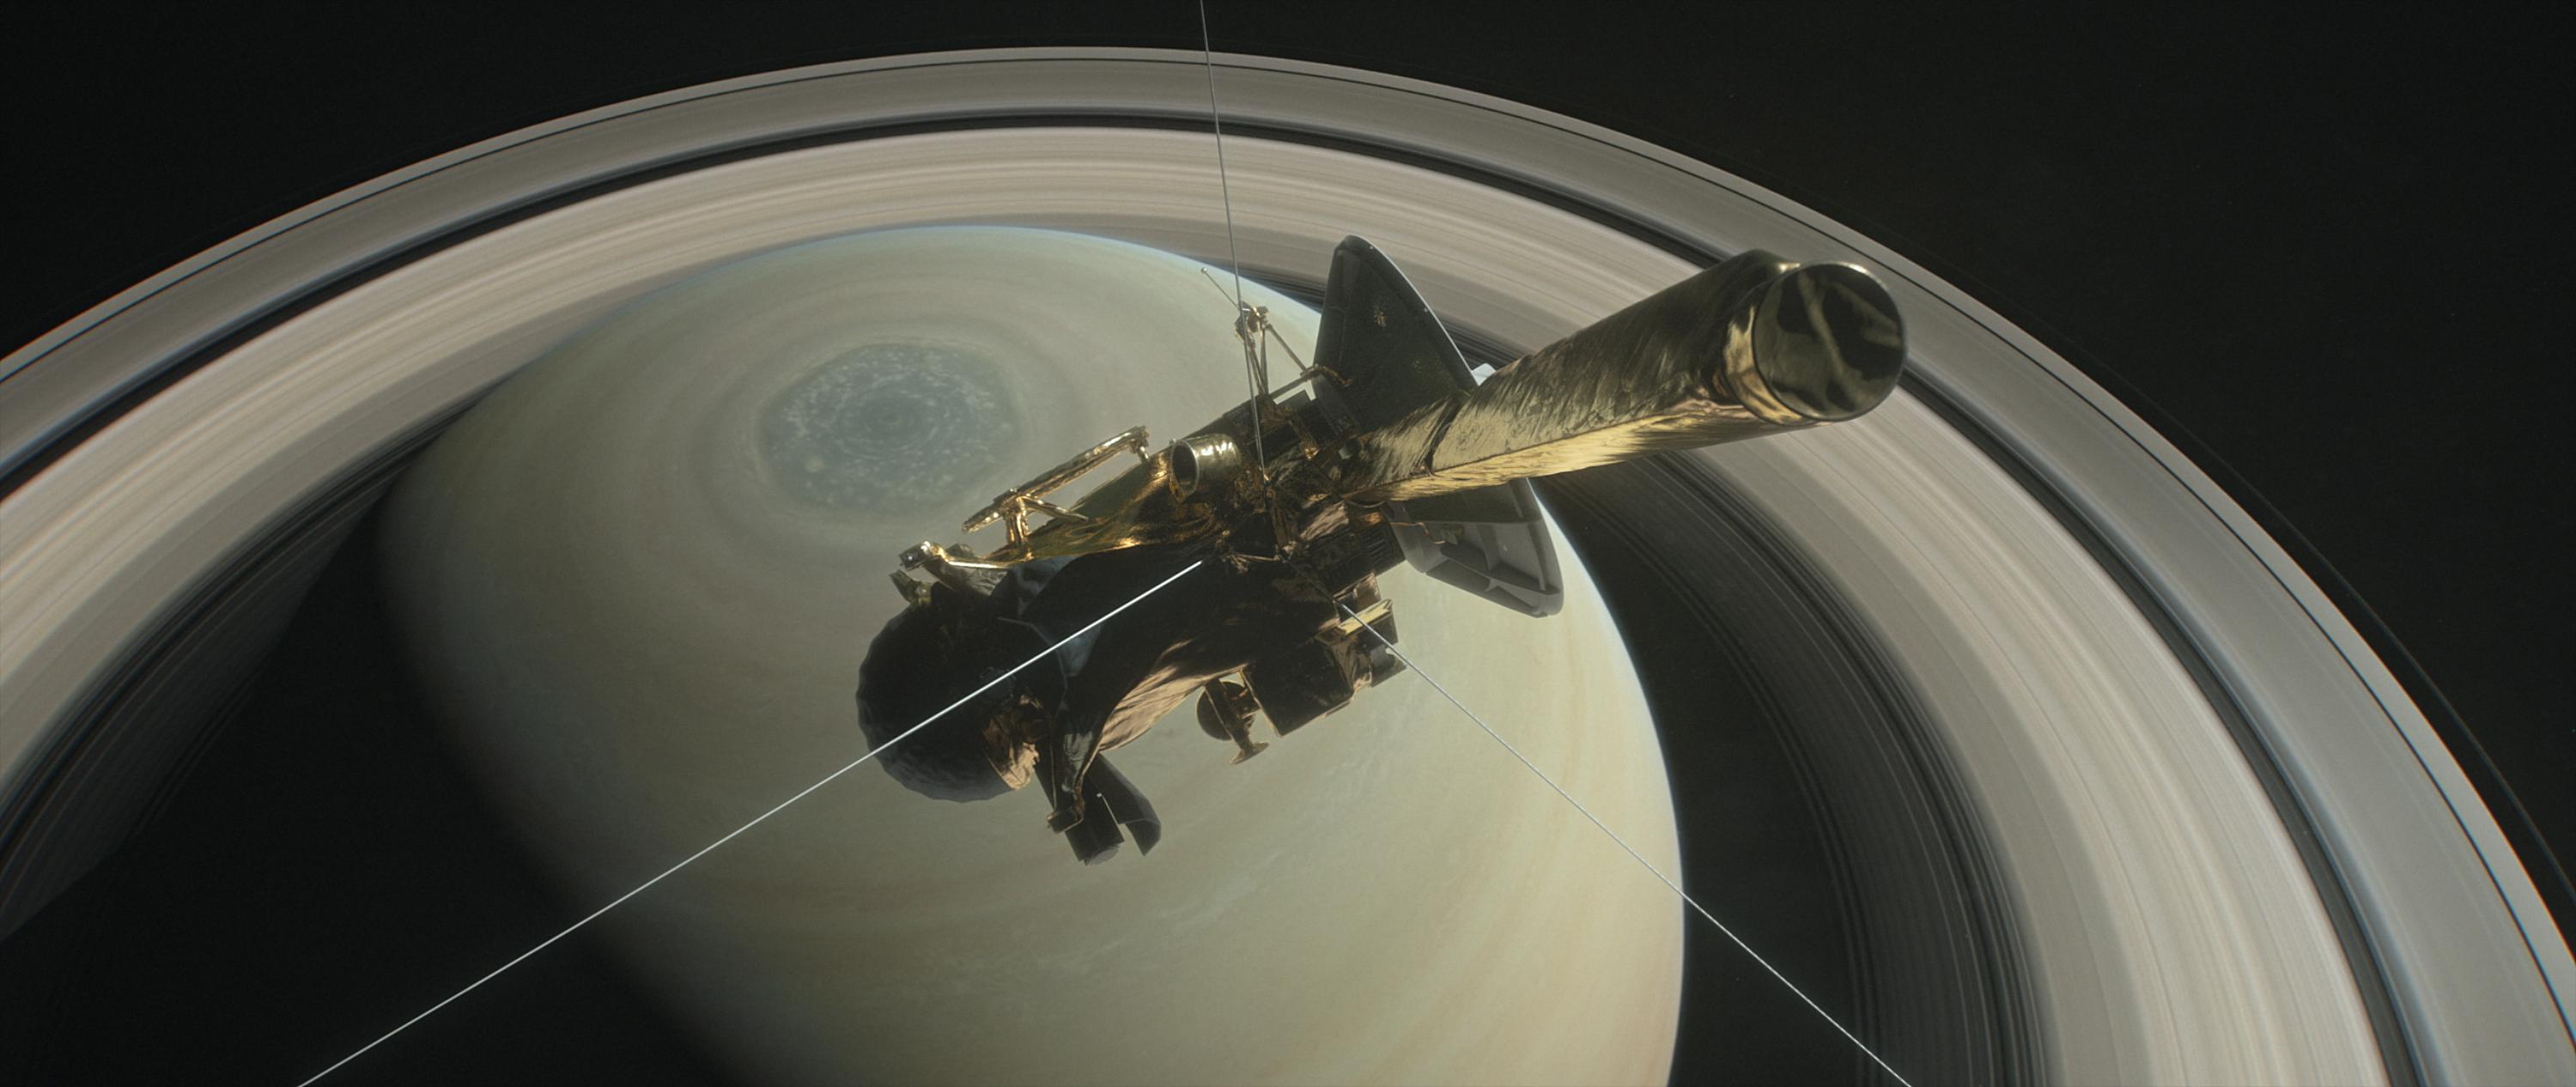 The Cassini spacecraft, which has been orbiting Saturn since 2004, will plunge into Saturn on September 15. (Image credit: NASA/JPL-Caltech)